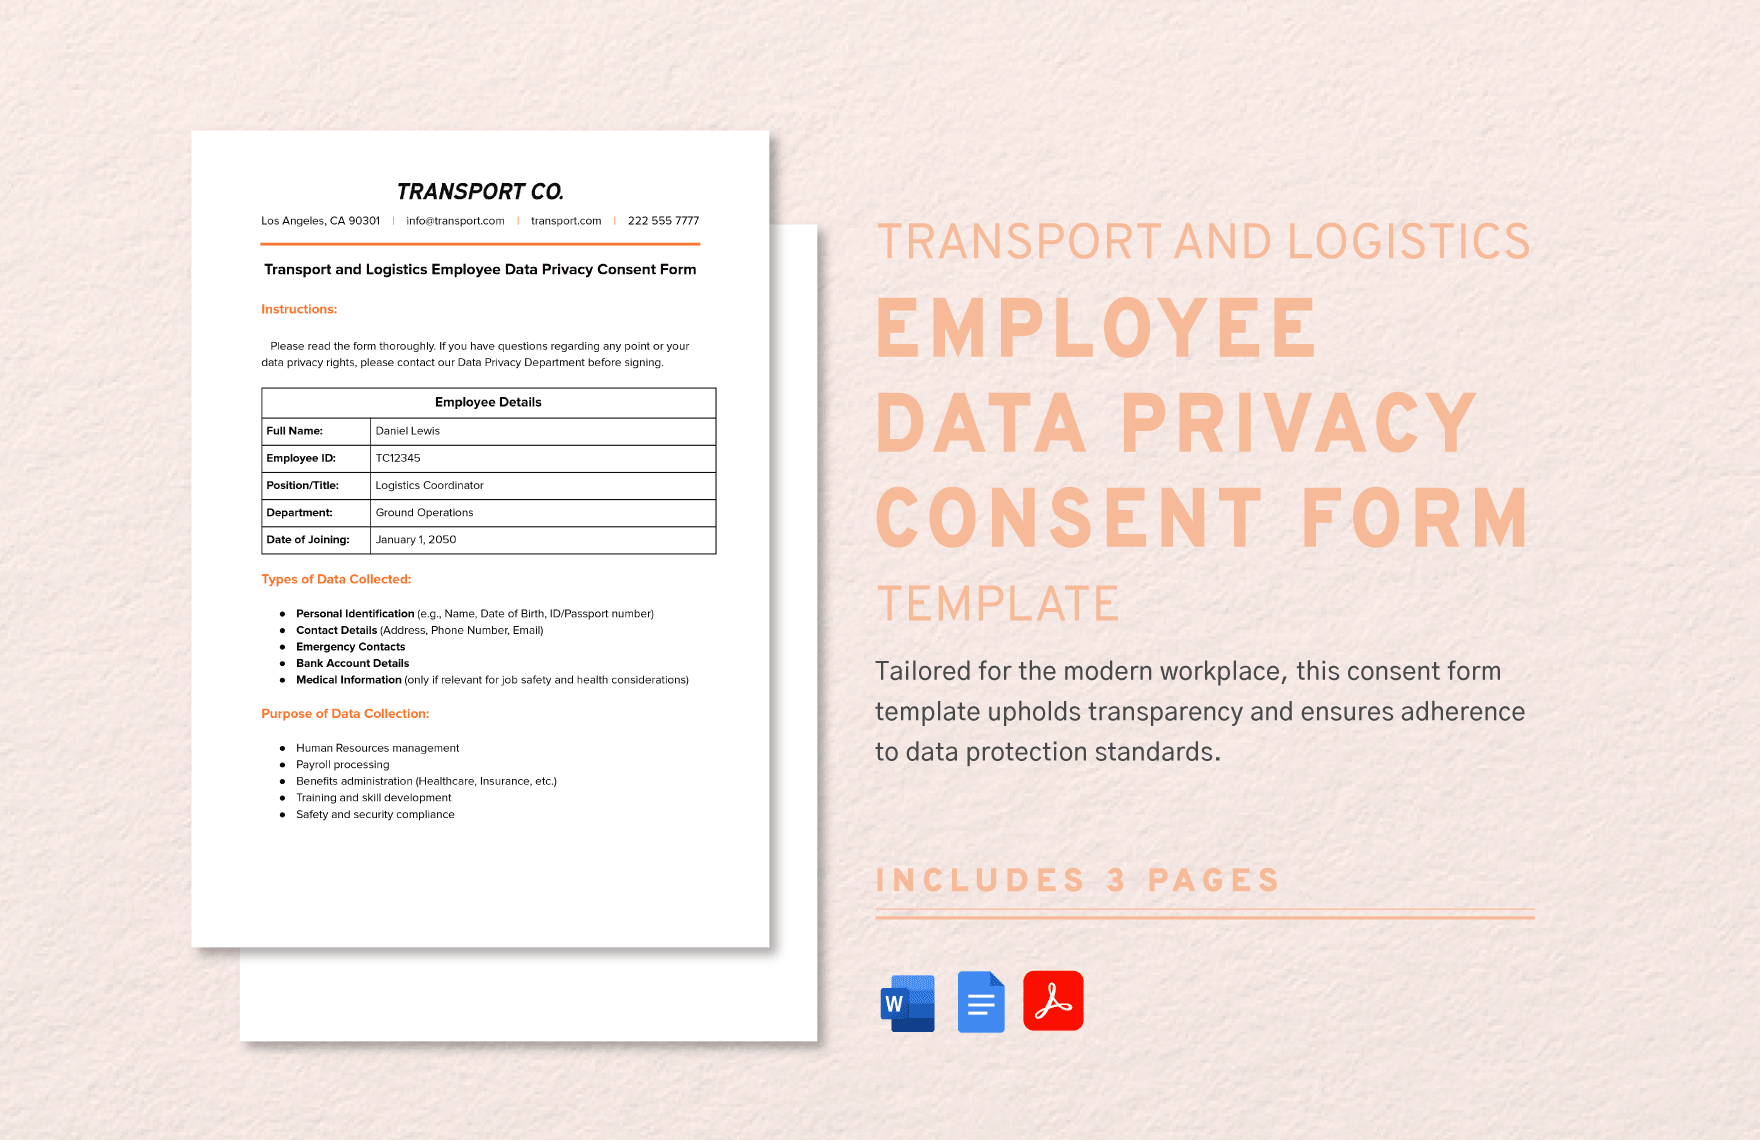 Transport and Logistics Employee Data Privacy Consent Form Template